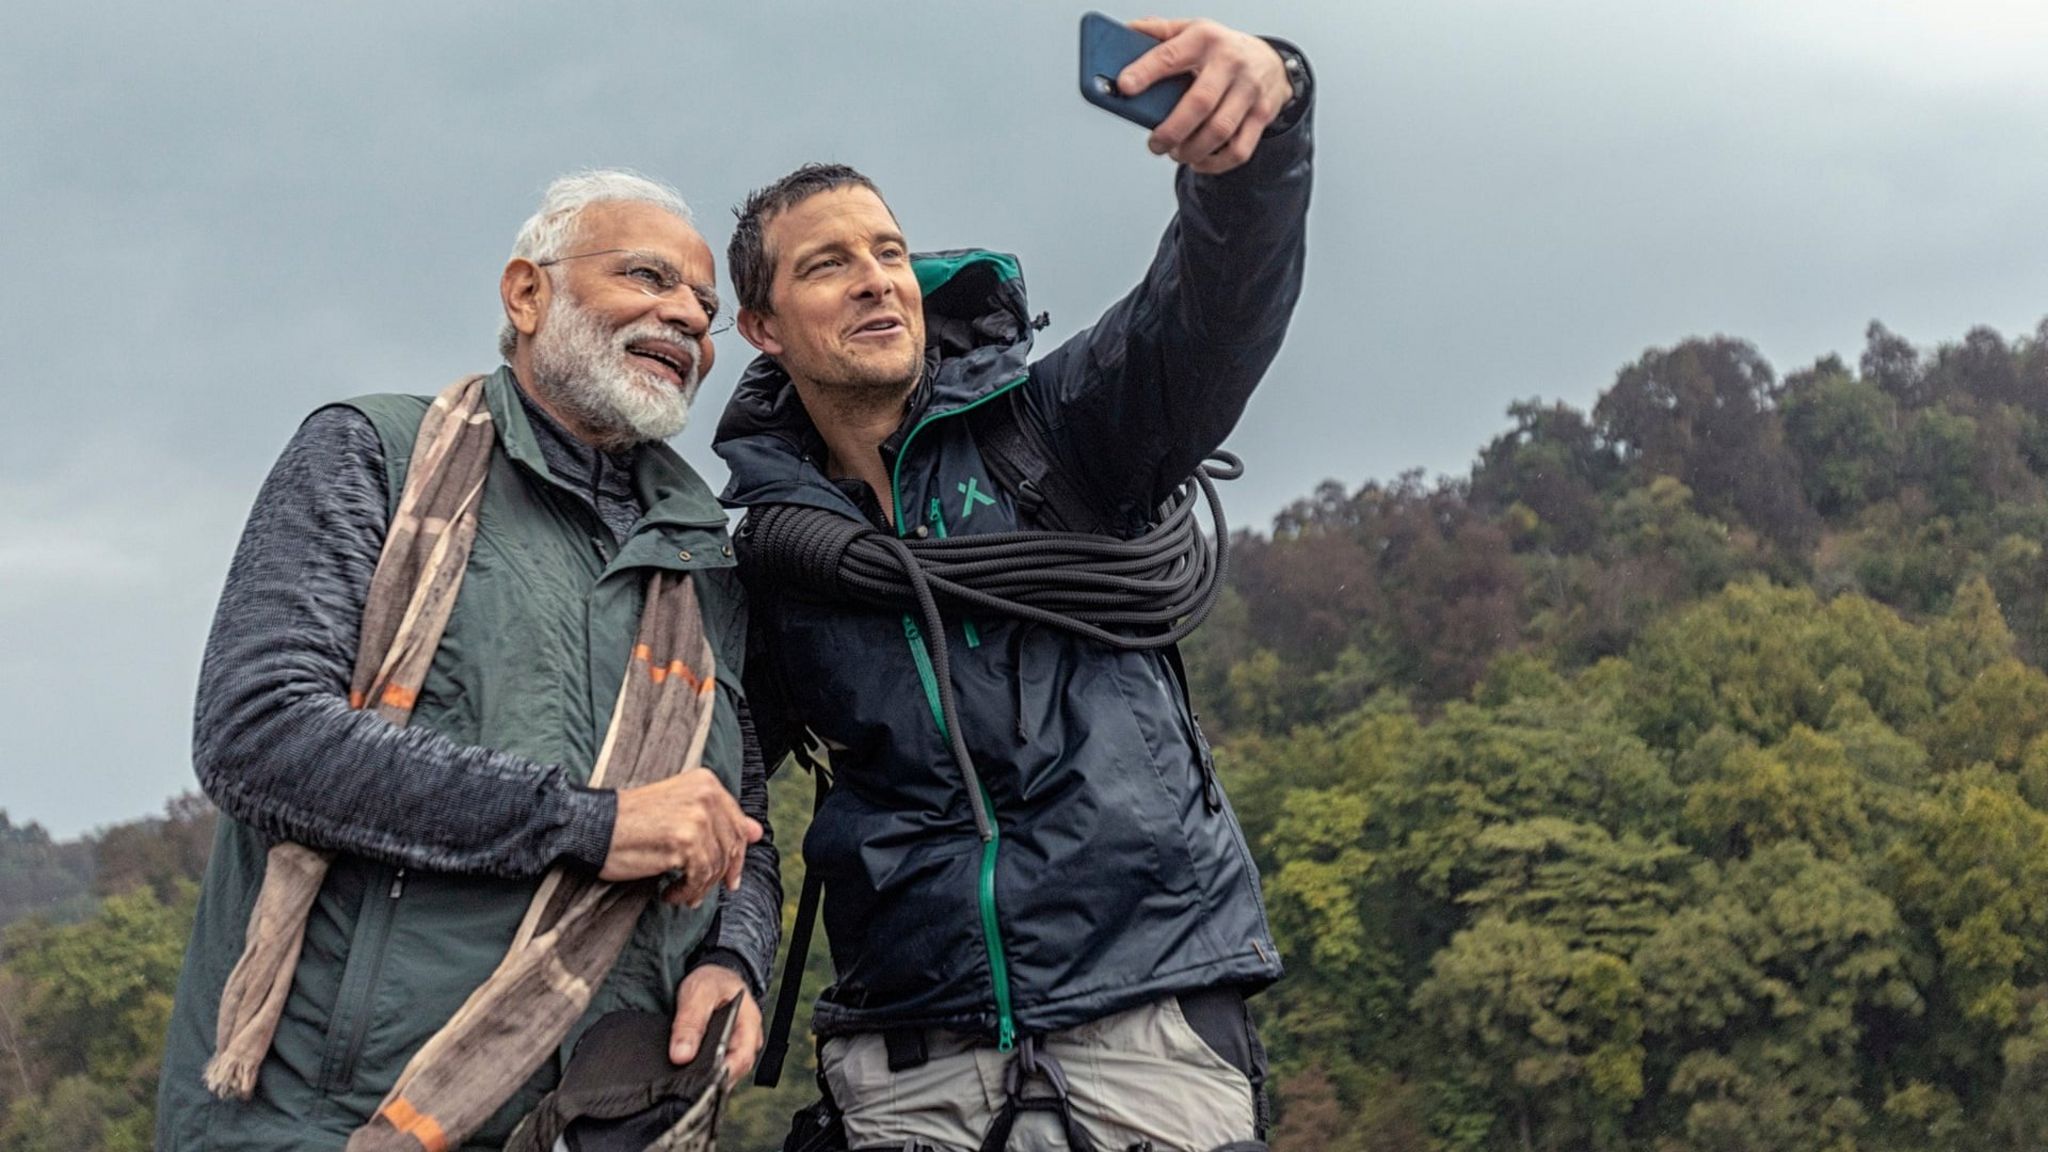 Bear Grylls takes a selfie with Indian leader Narendra Modi